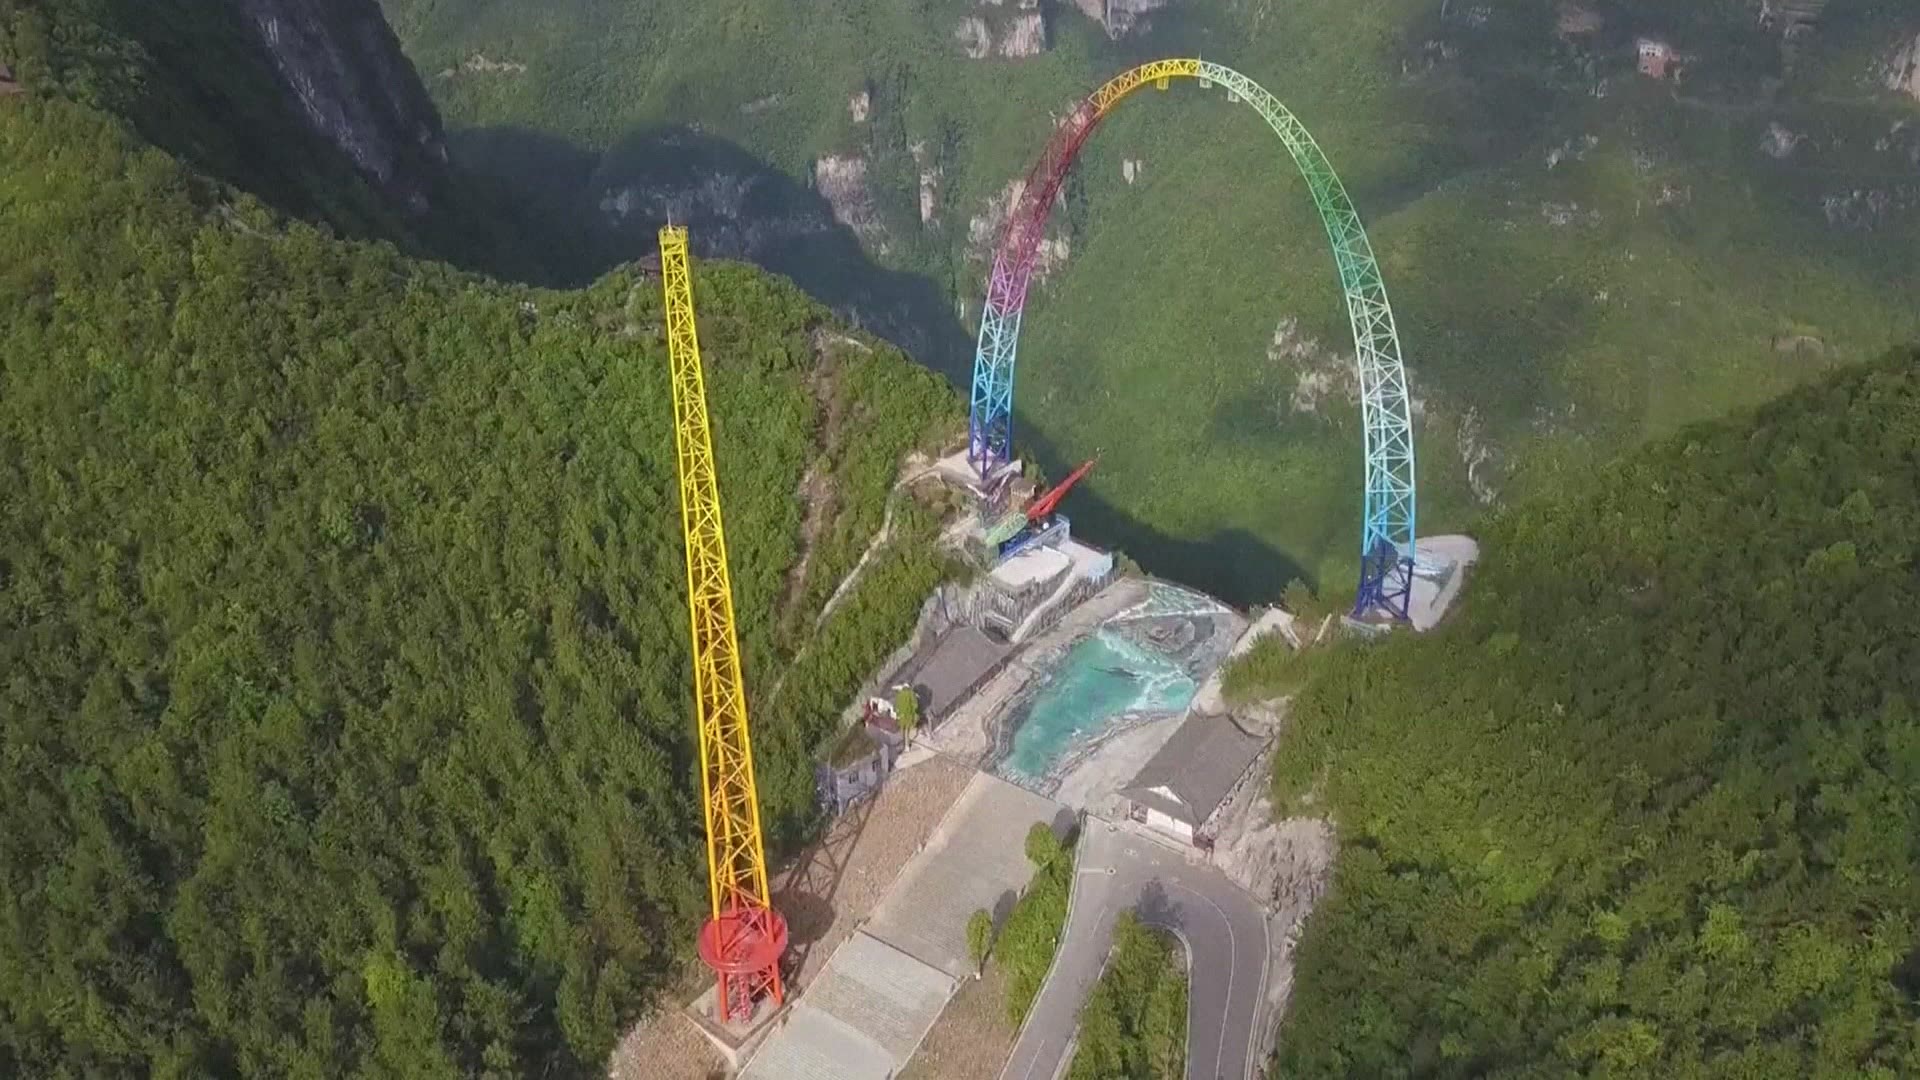 Riders drop nearly the length of a football field at 80 m.p.h as they swing over a cliff.